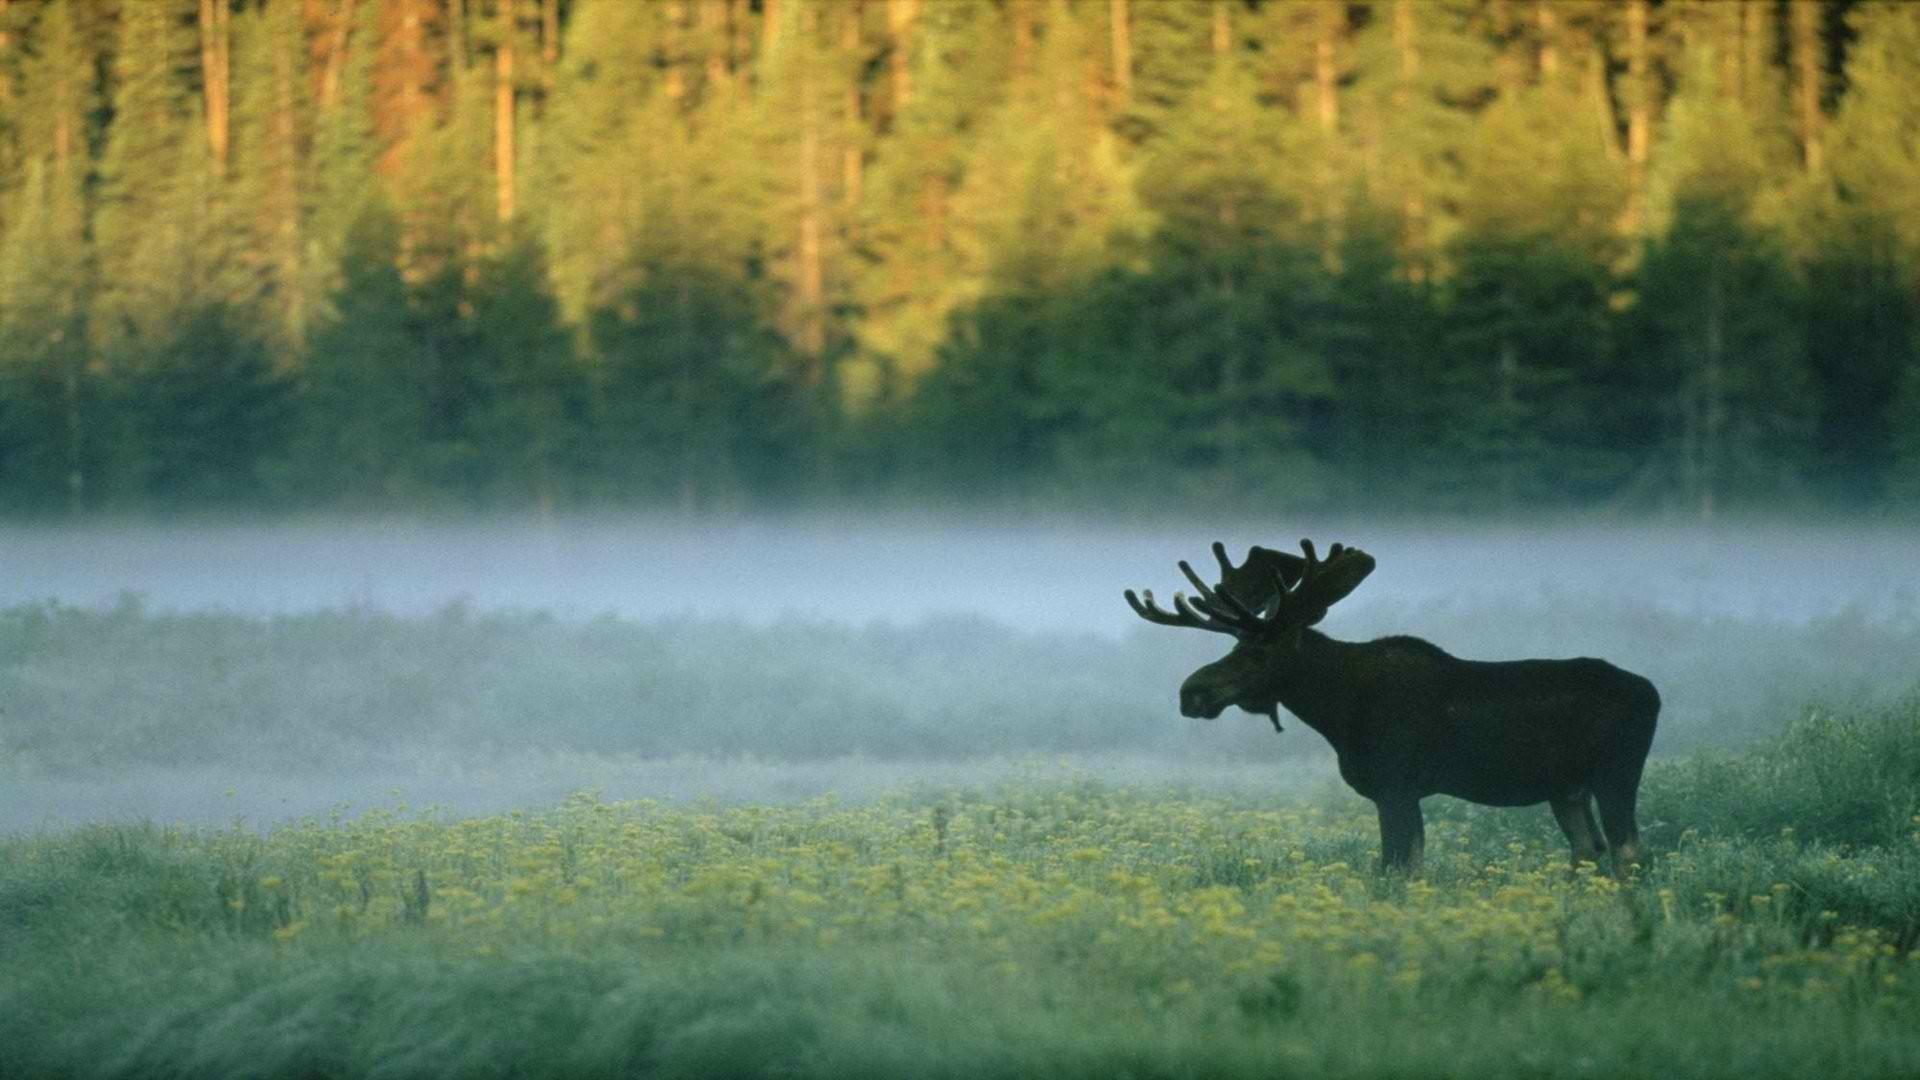 #forest, #nature, #moose, #animals wallpaper. General